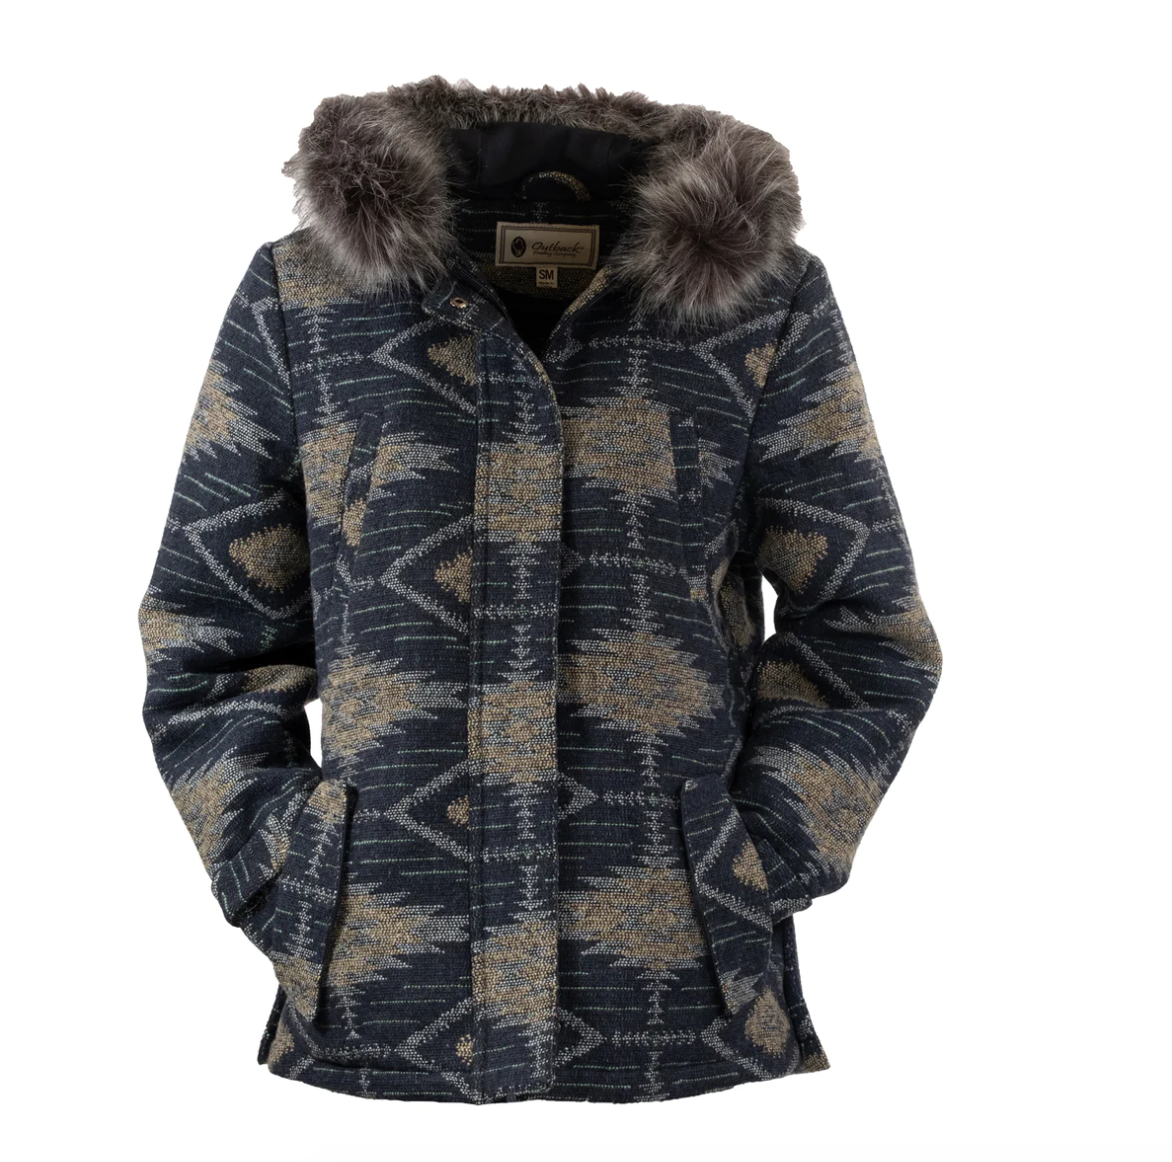 LADIES OUTBACK TRADING CO MYRA JACKET - 40% OFF